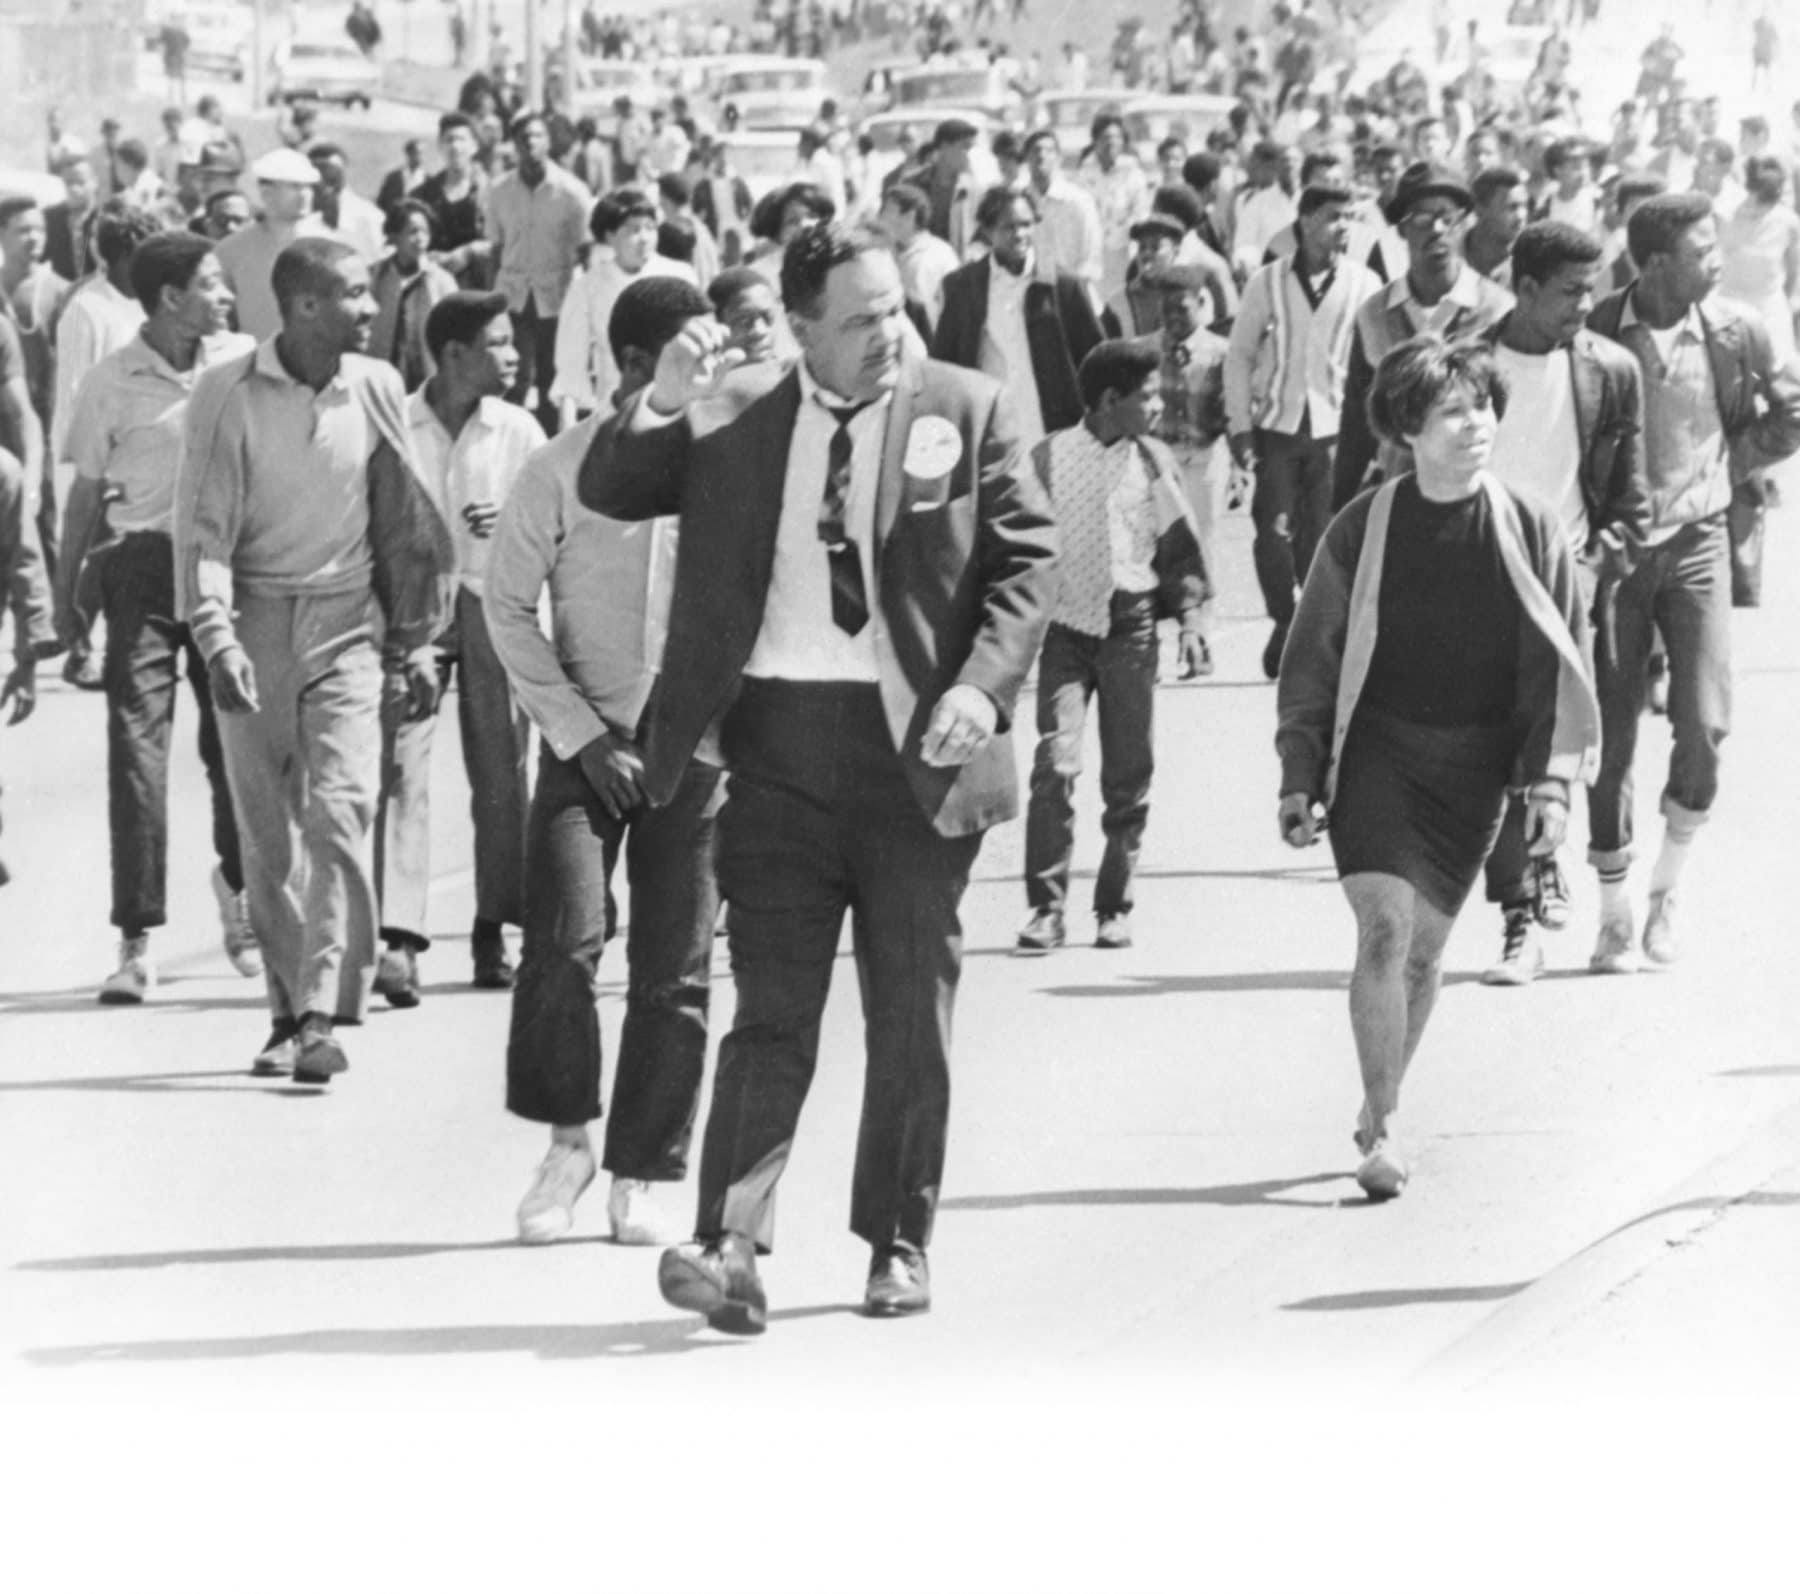 Bruce Watkins with crowd marching